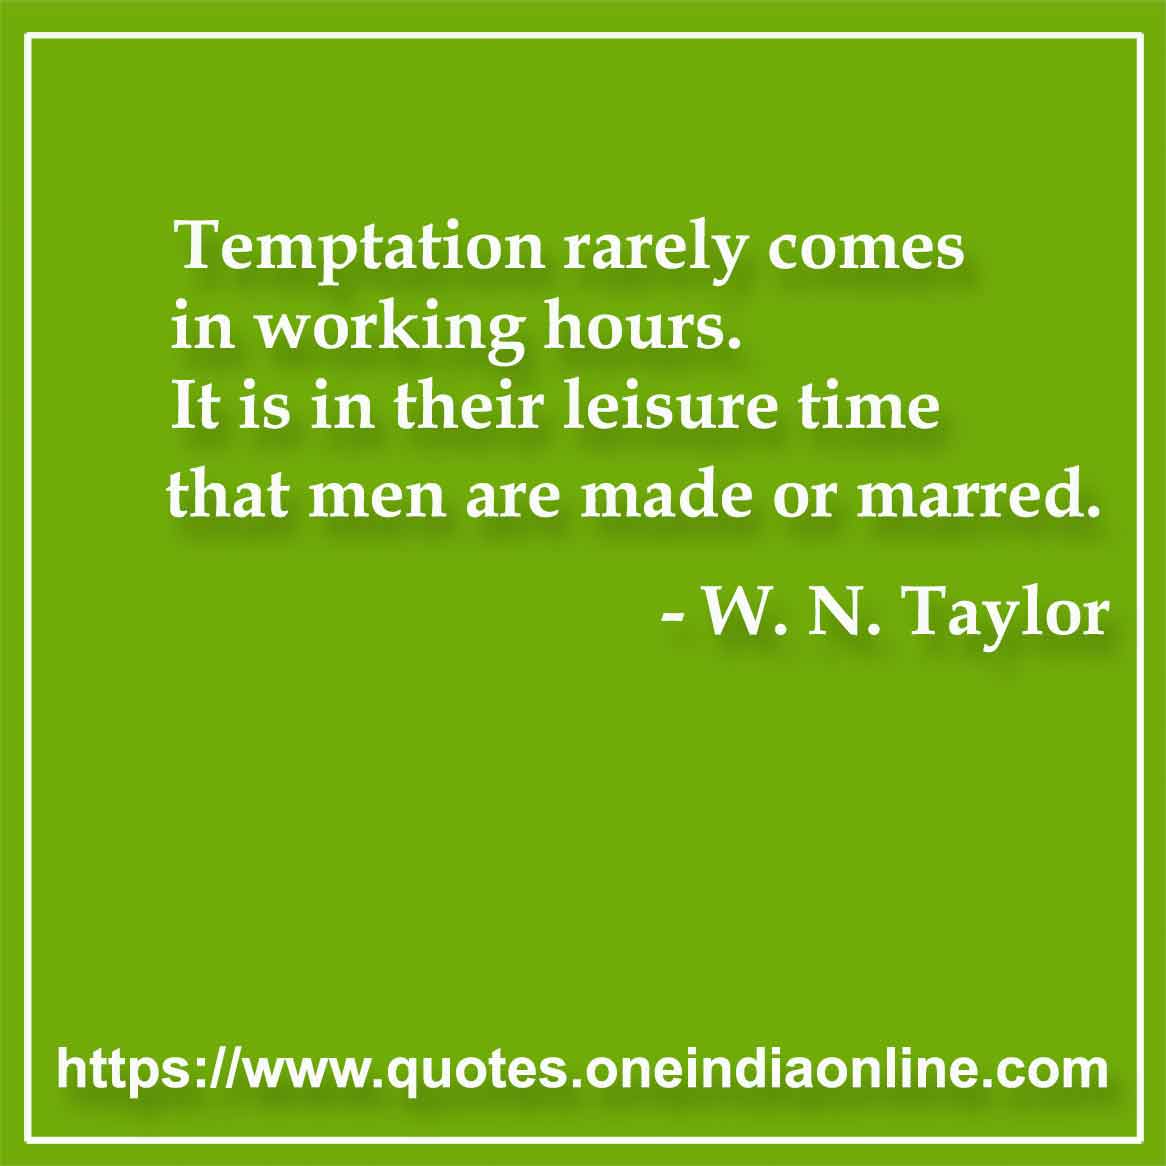 Temptation rarely comes in working hours. It is in their leisure time that men are made or marred.

- W. N. Taylor Quotes